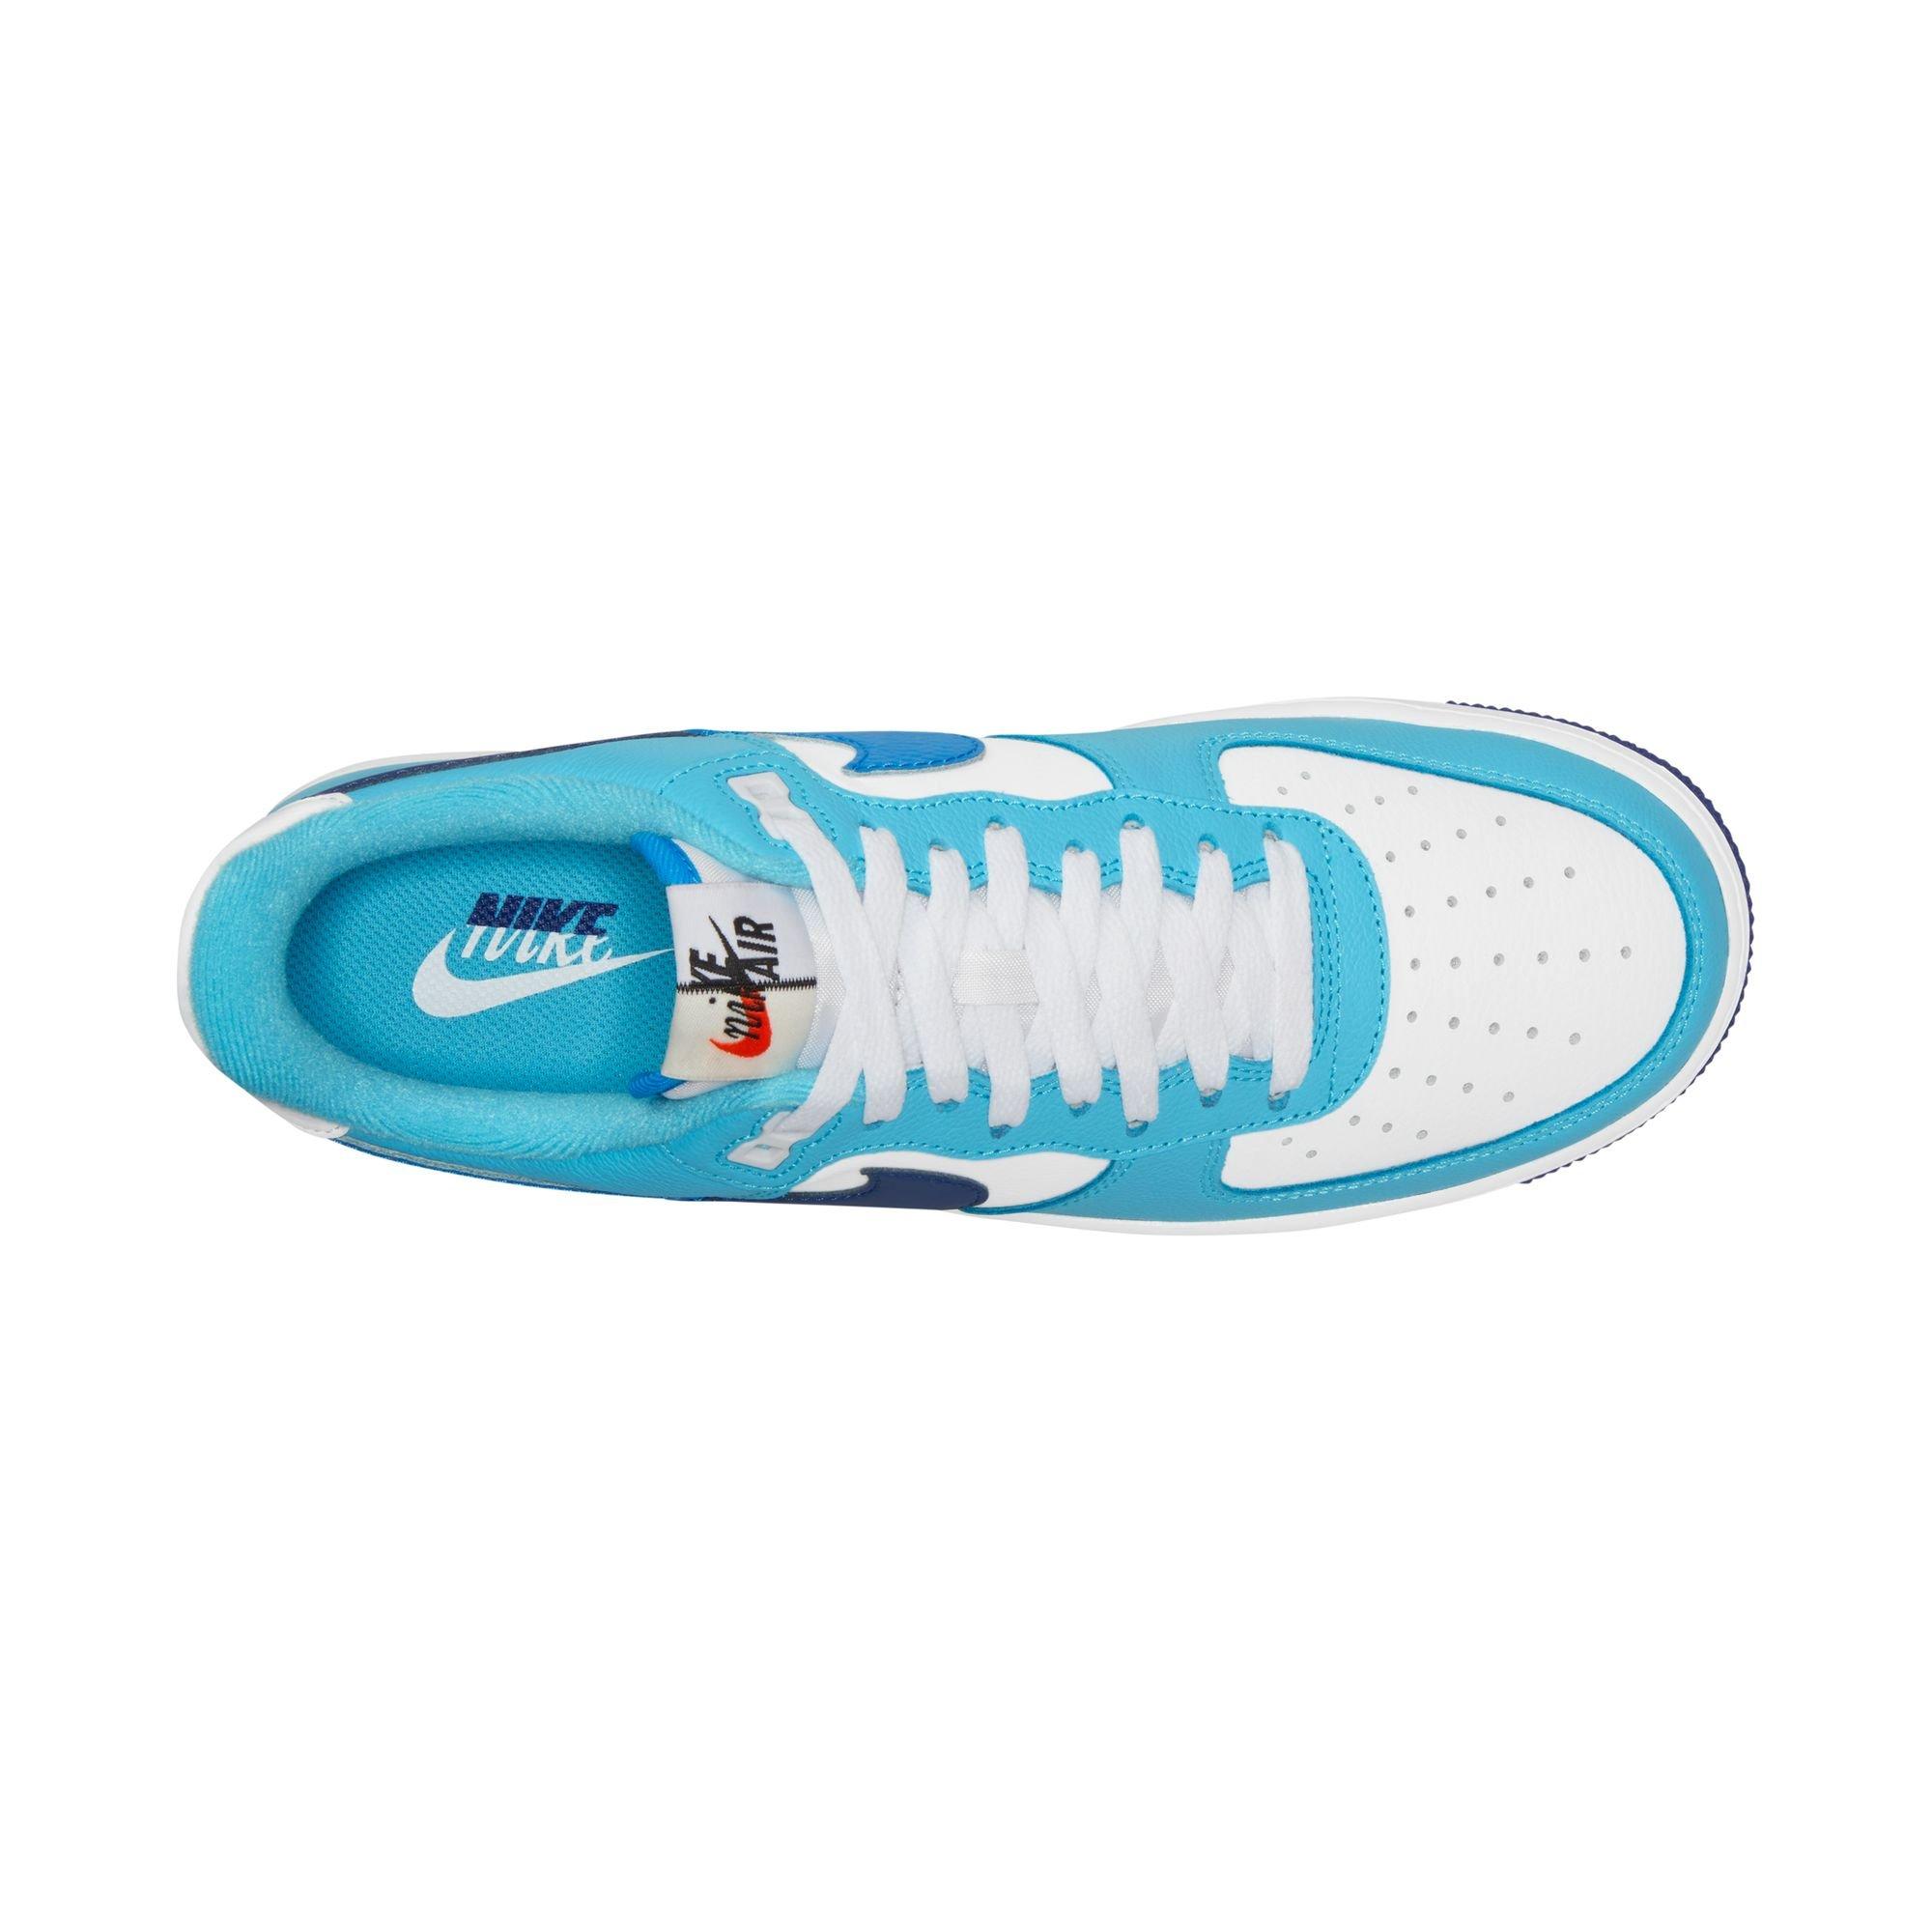 The Nike Air Force 1 Low Split Light Photo Blue showcases a